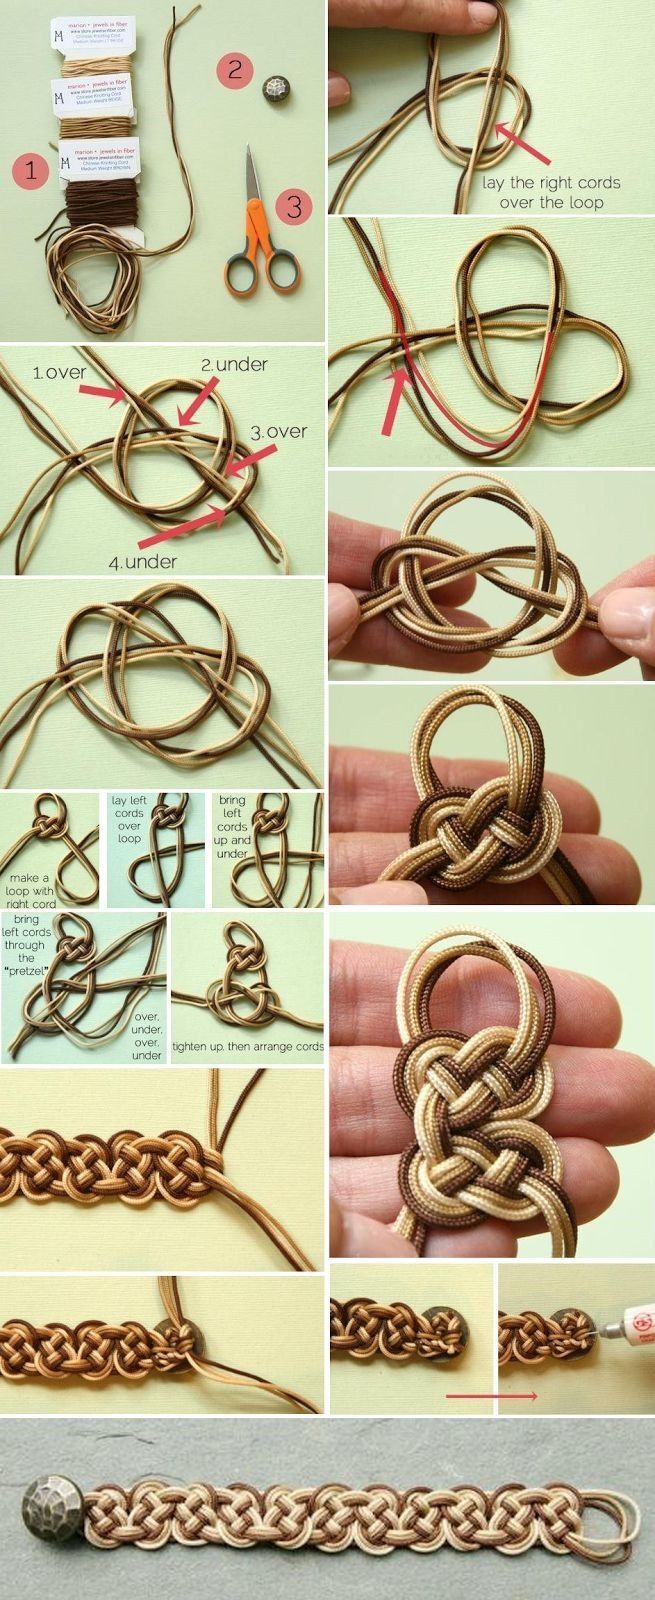 ombre celtic knot bracelet tutorial :: diy jewelry making supplies